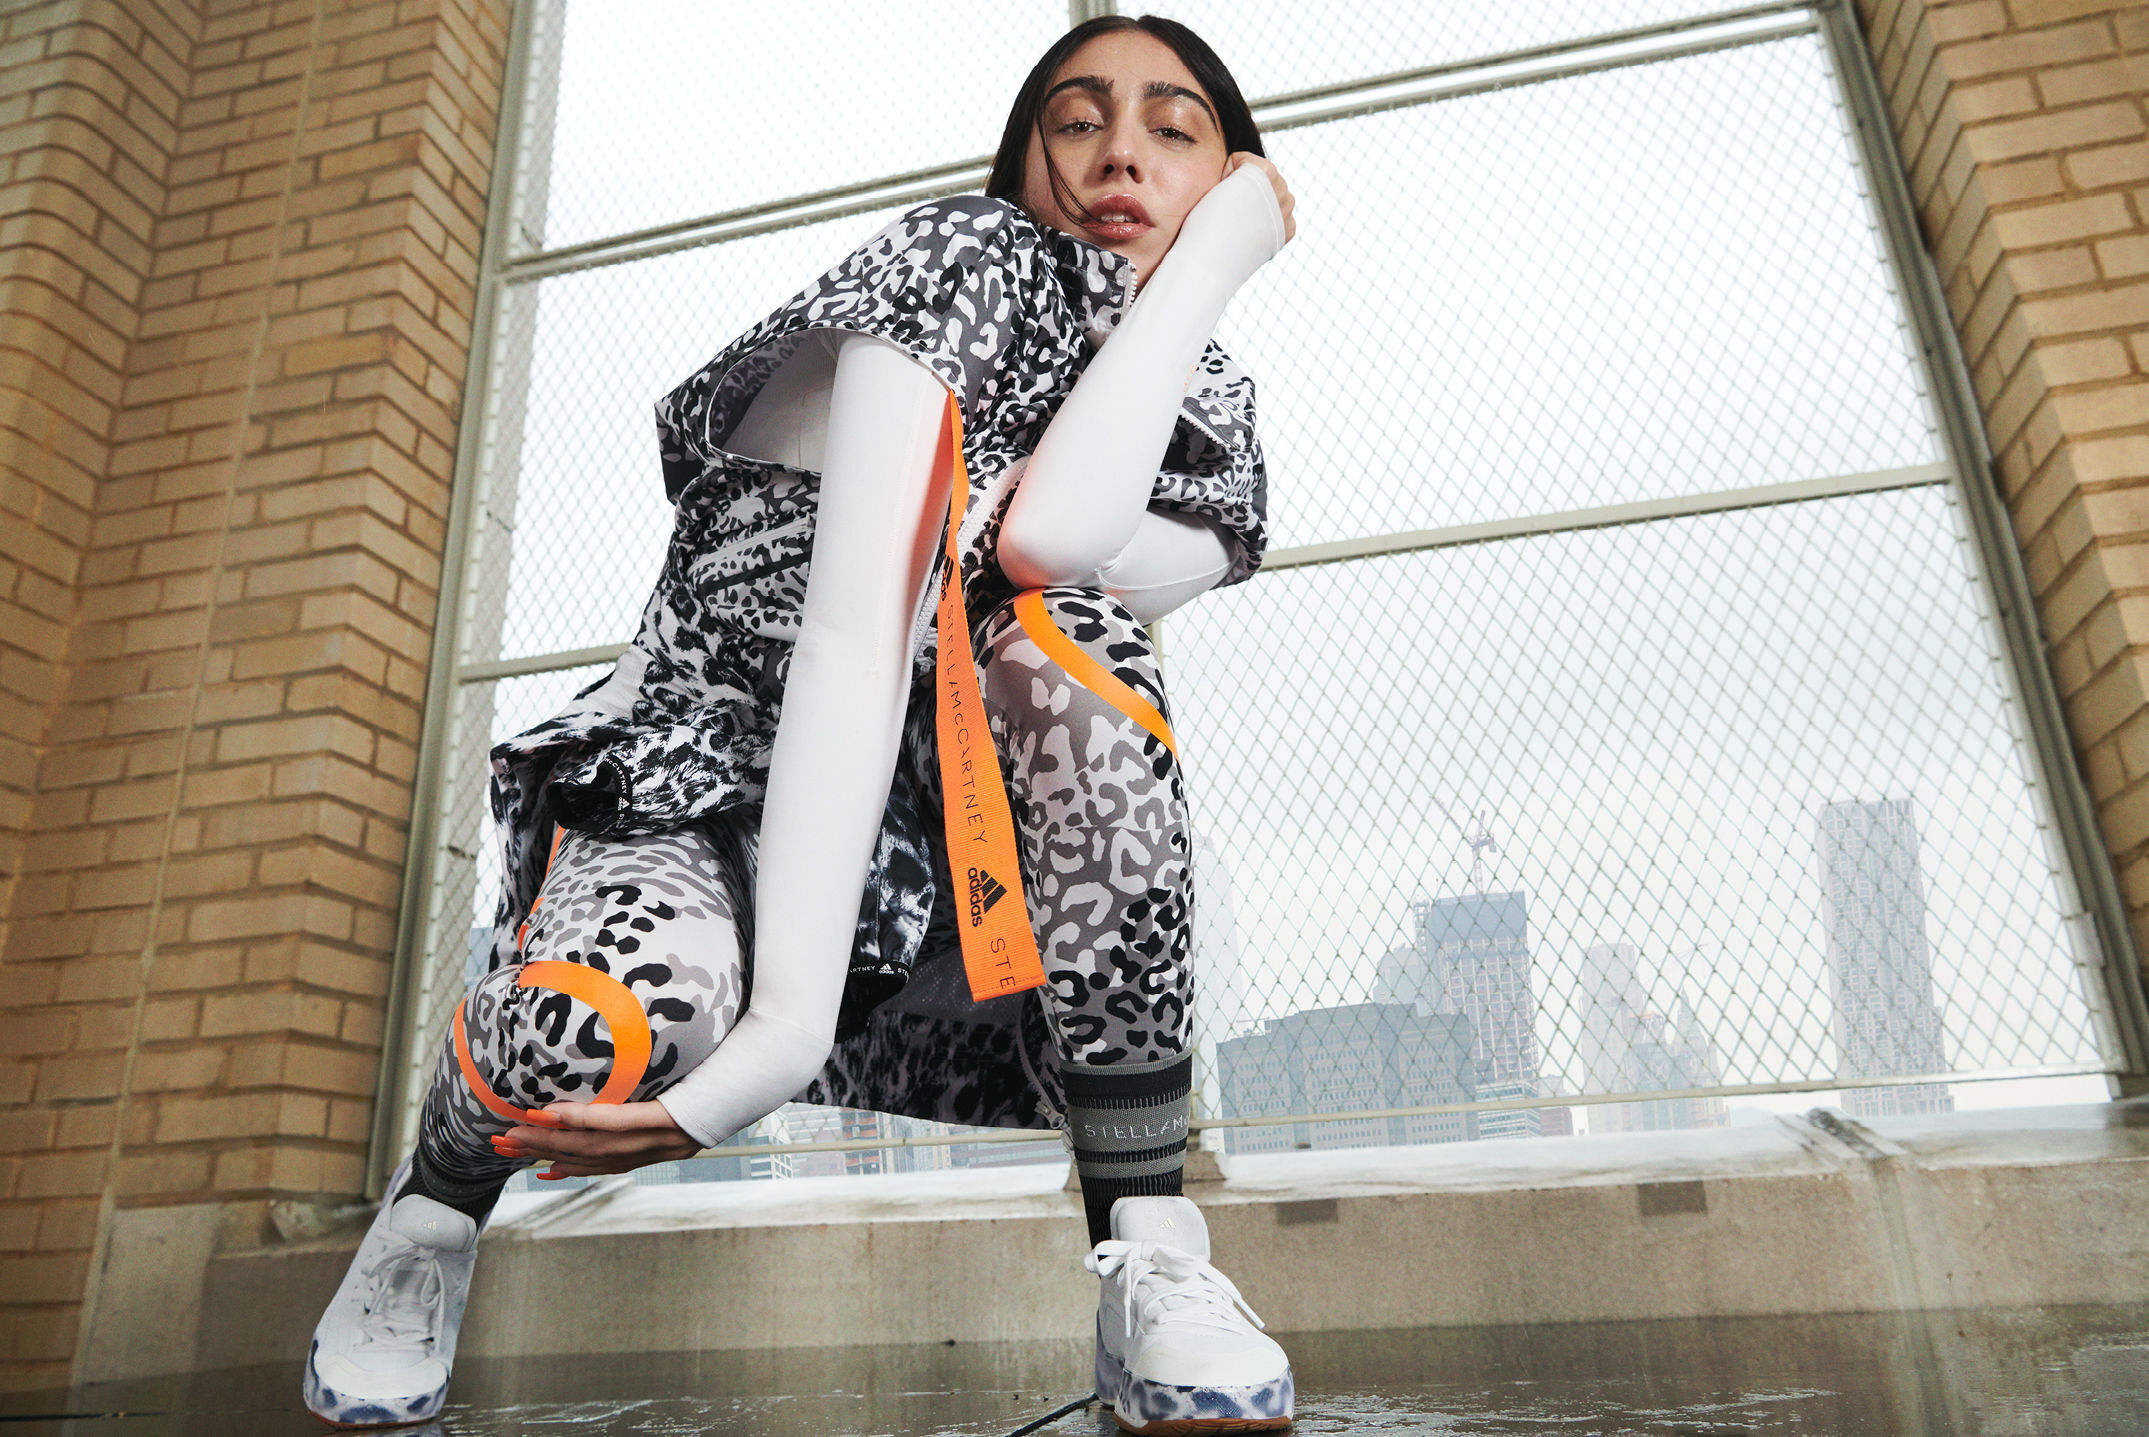 adidas by Stella McCartney Autumn Winter 2020 is ready for the